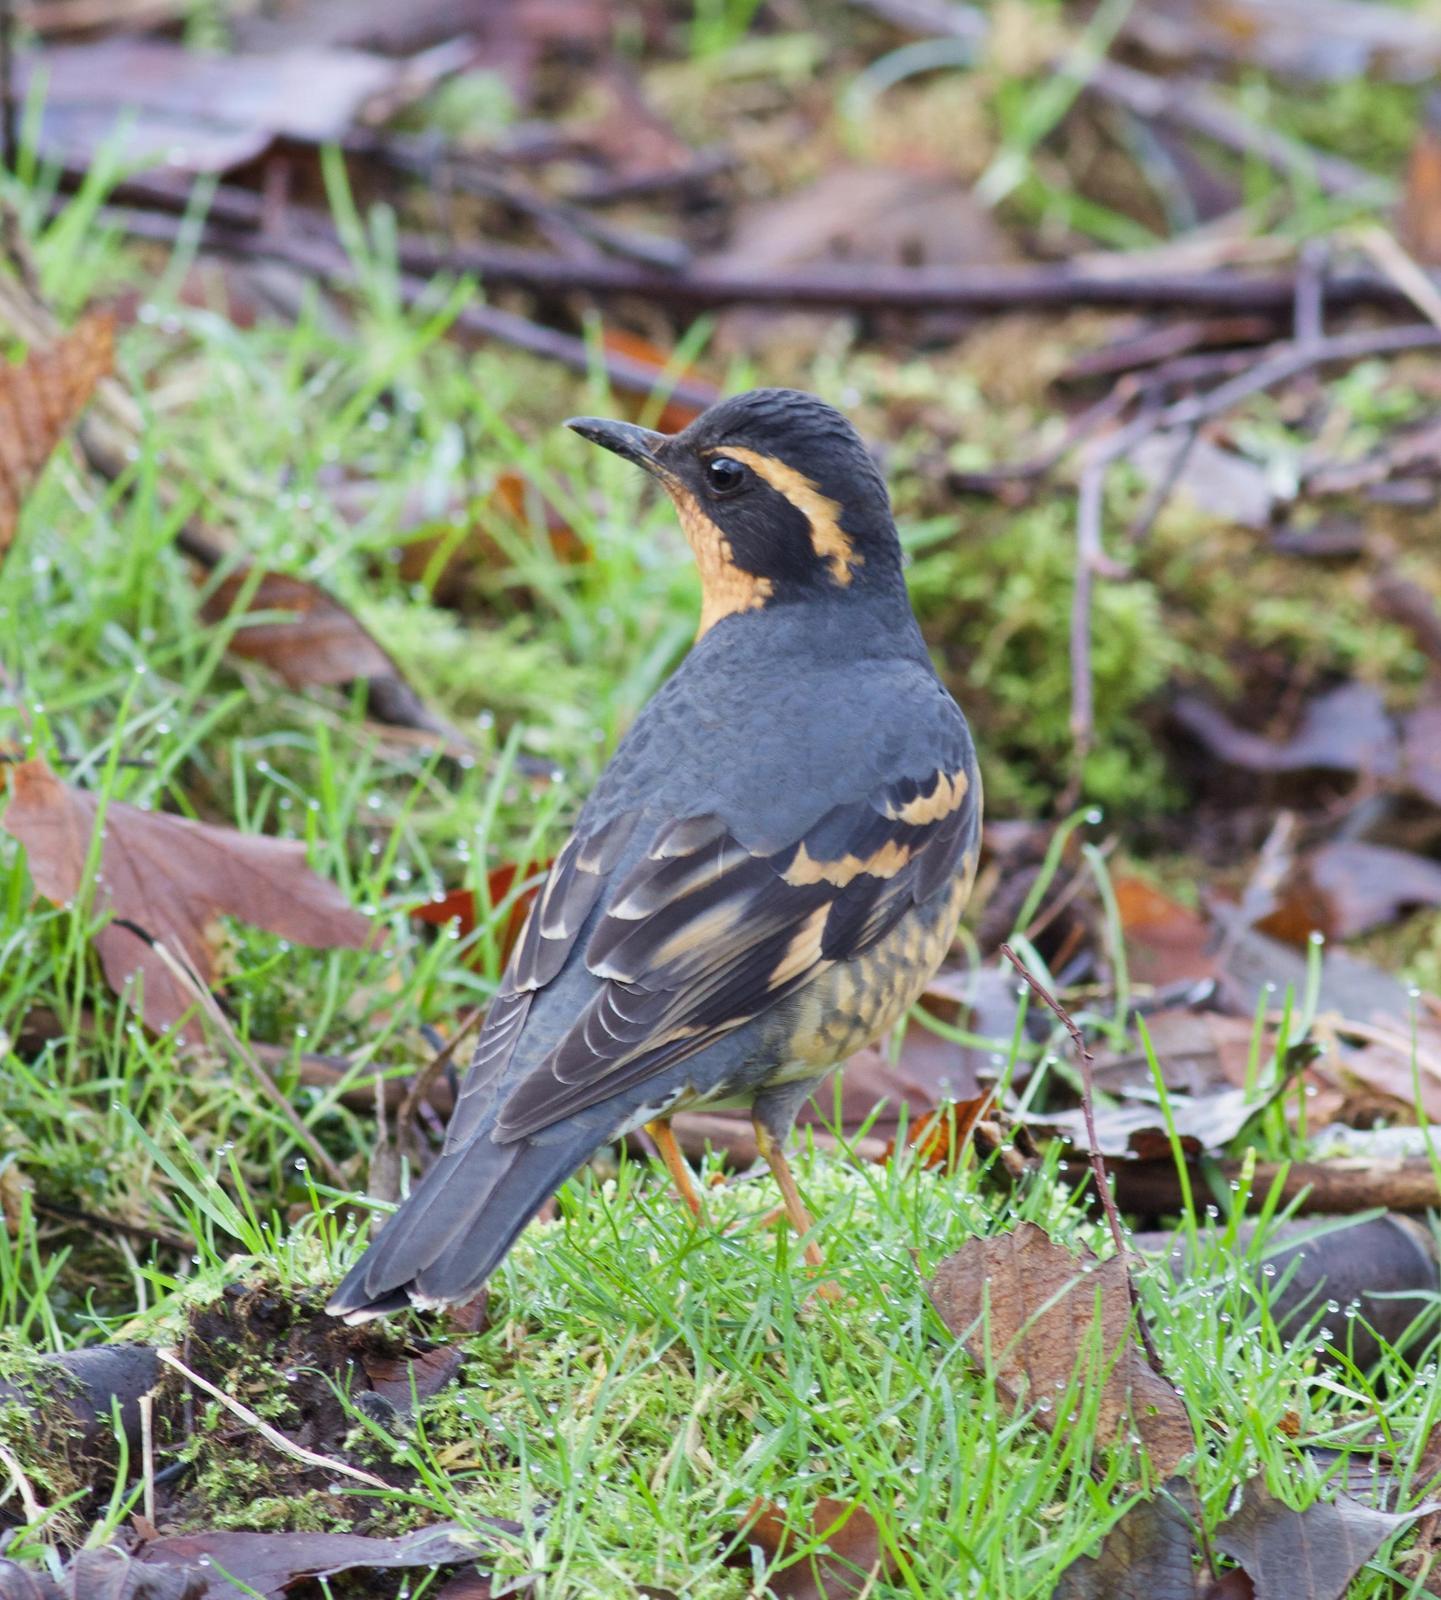 Varied Thrush Photo by Kathryn Keith